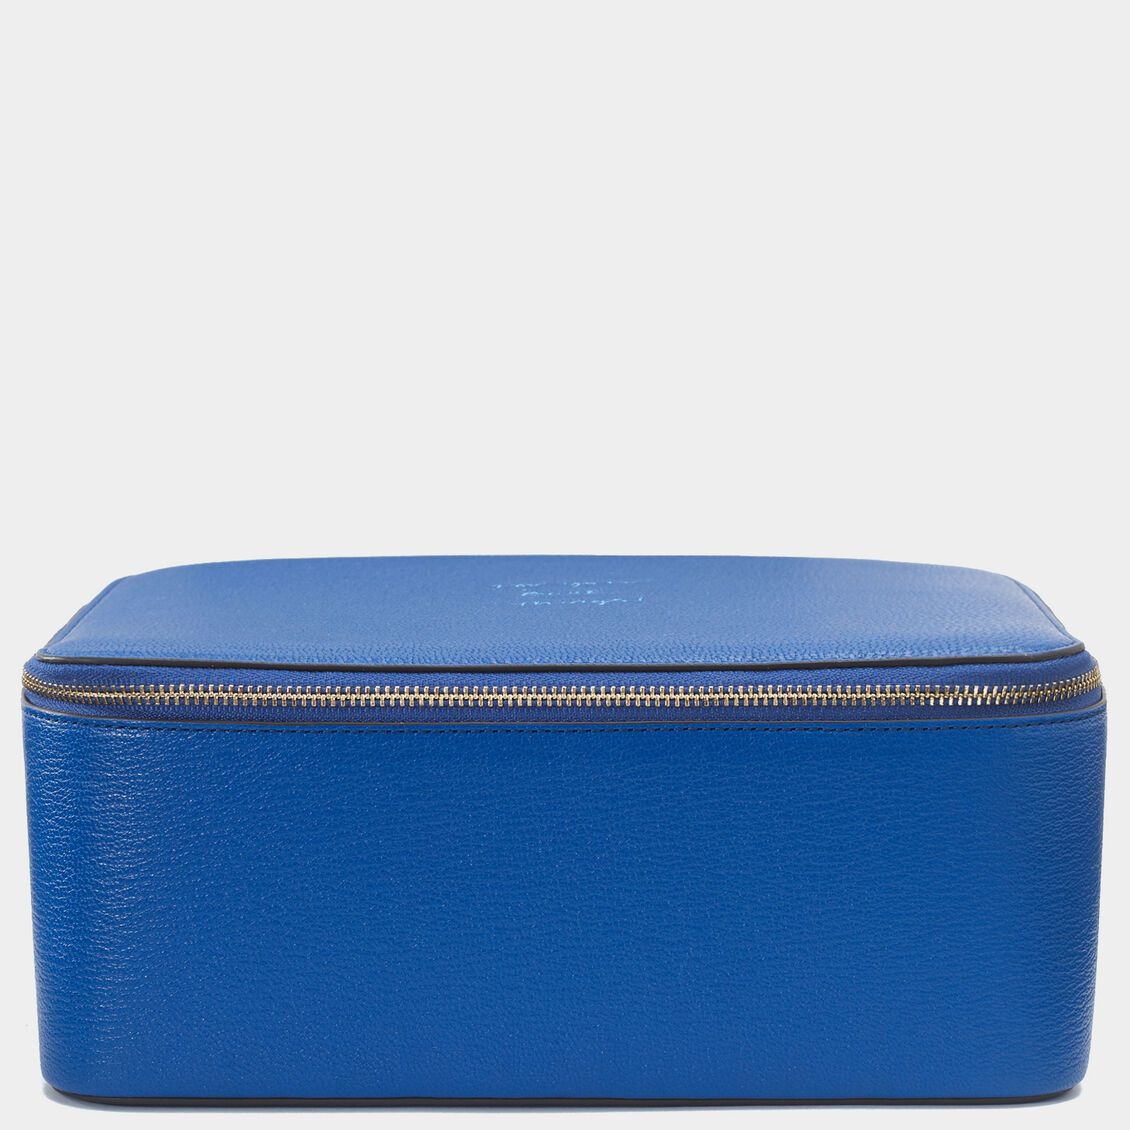 Yes No Maybe Wow Box XL -

                  
                    Capra Leather in Electric Blue -
                  

                  Anya Hindmarch EU
